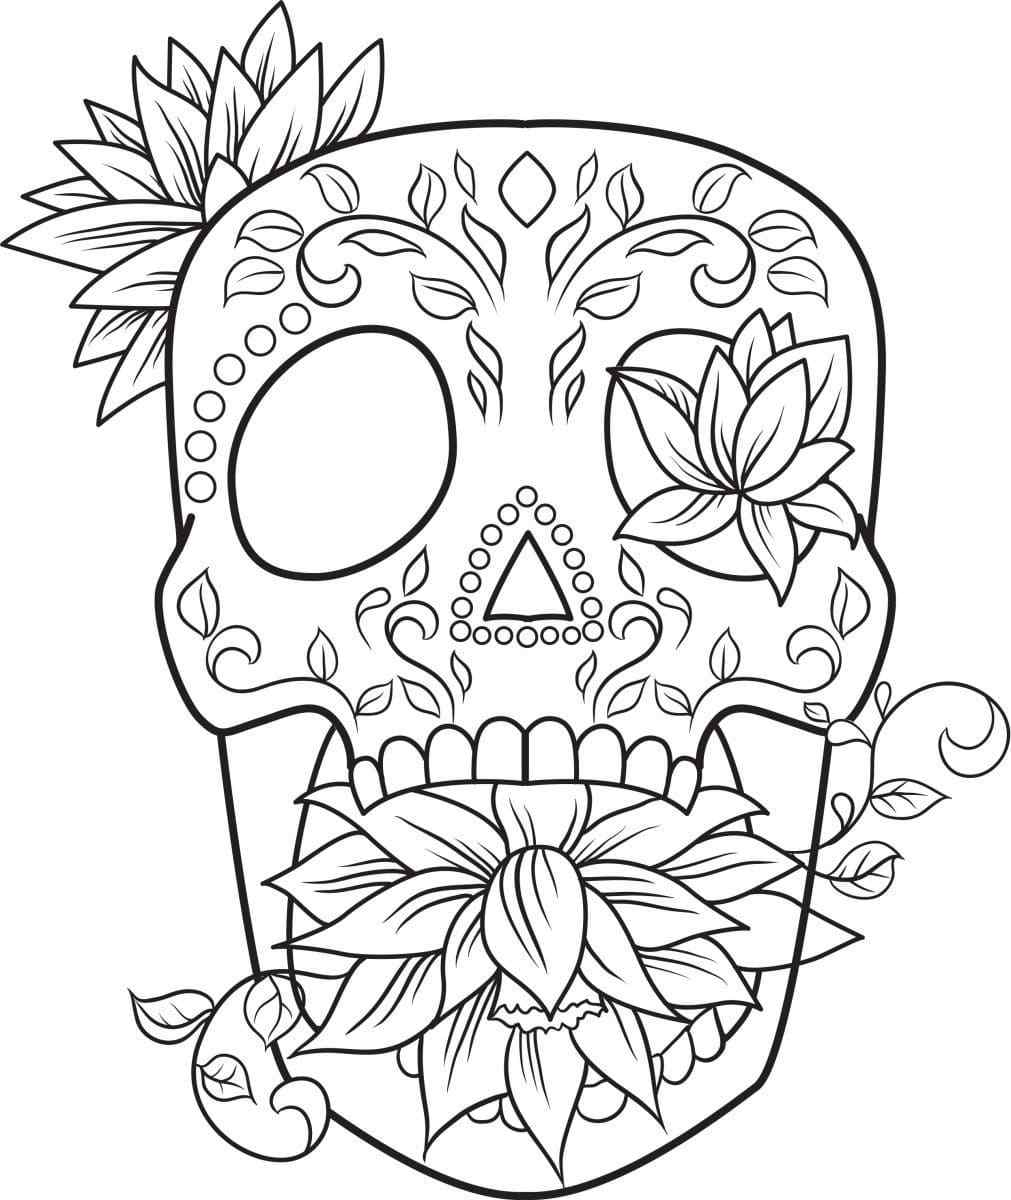 Skull With A Flower Bud In The Eye Coloring Page